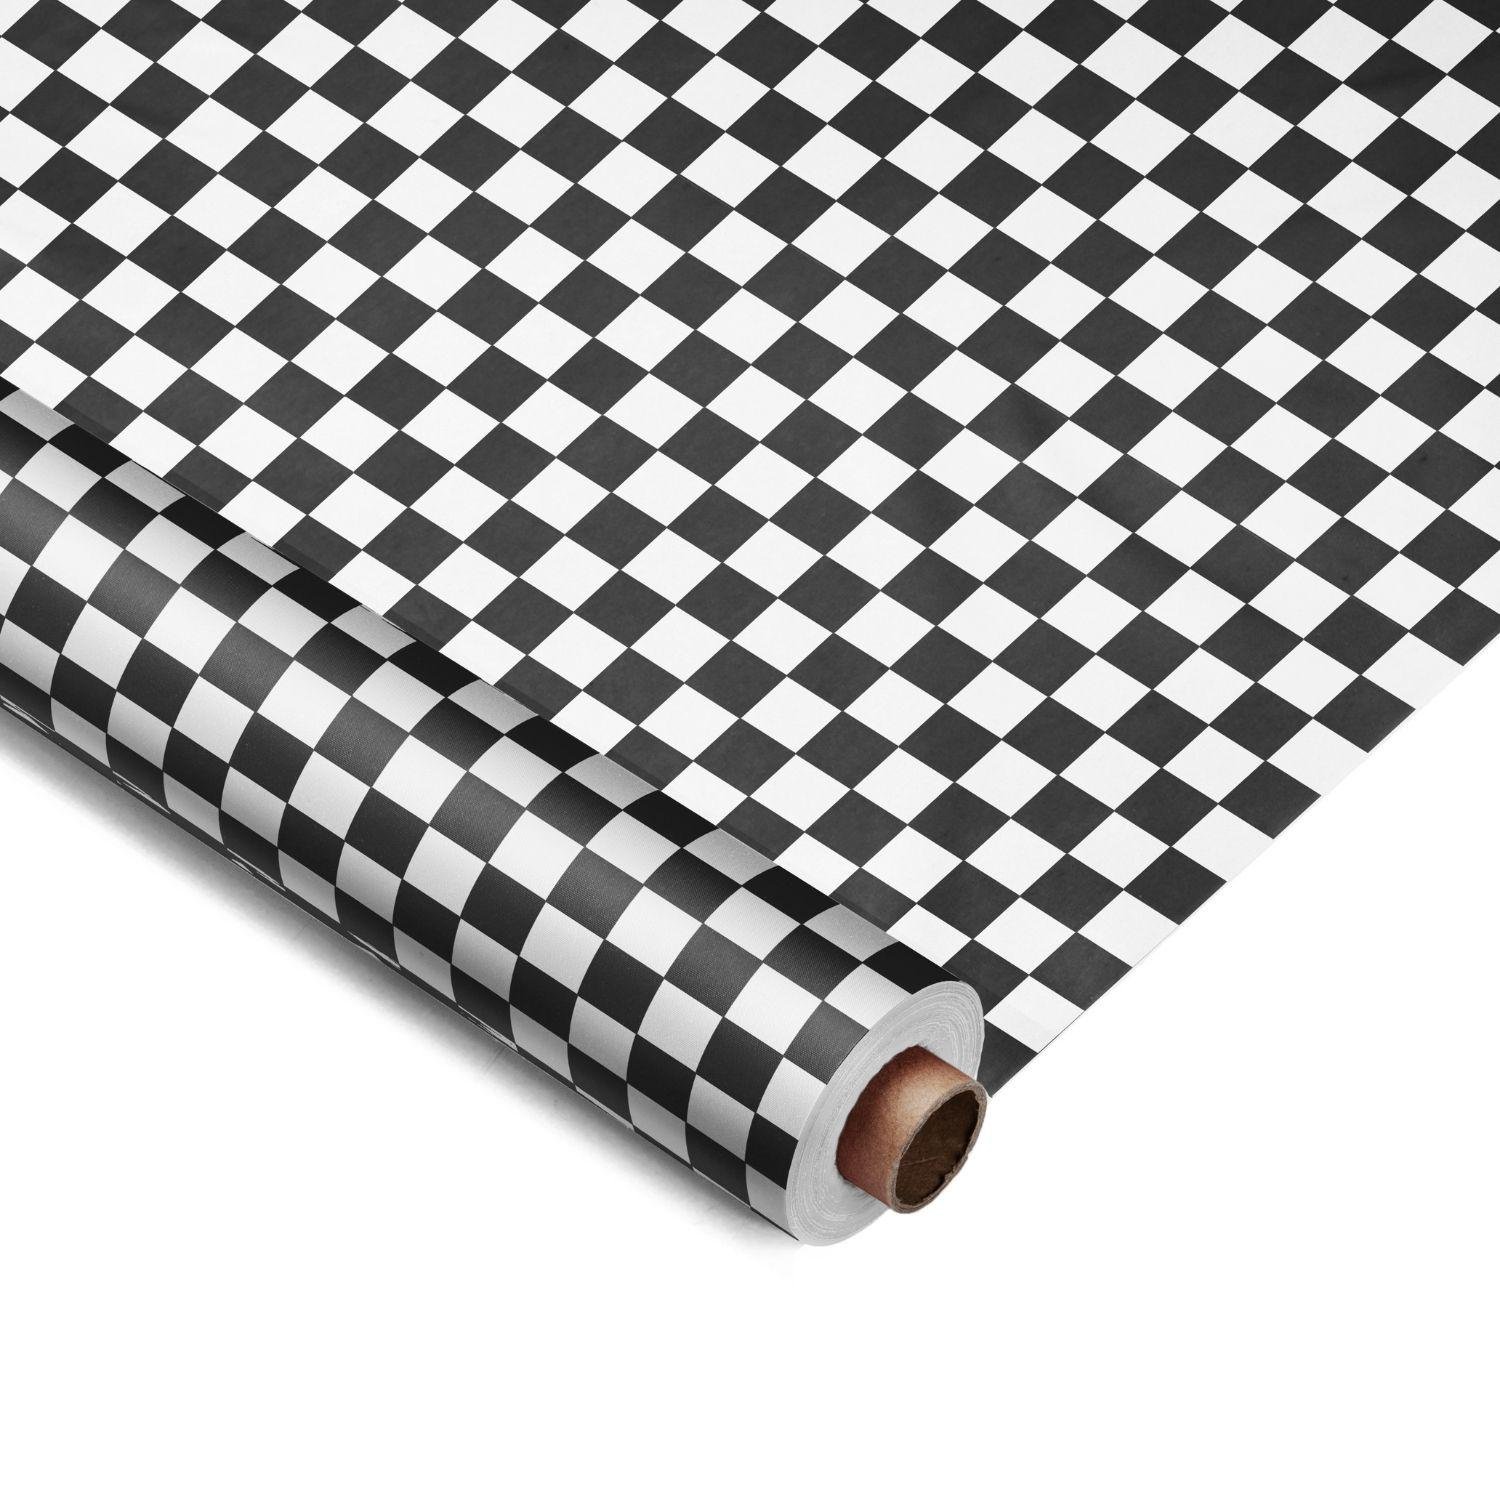 40 In. X 300' Black/White Checkered Table Roll